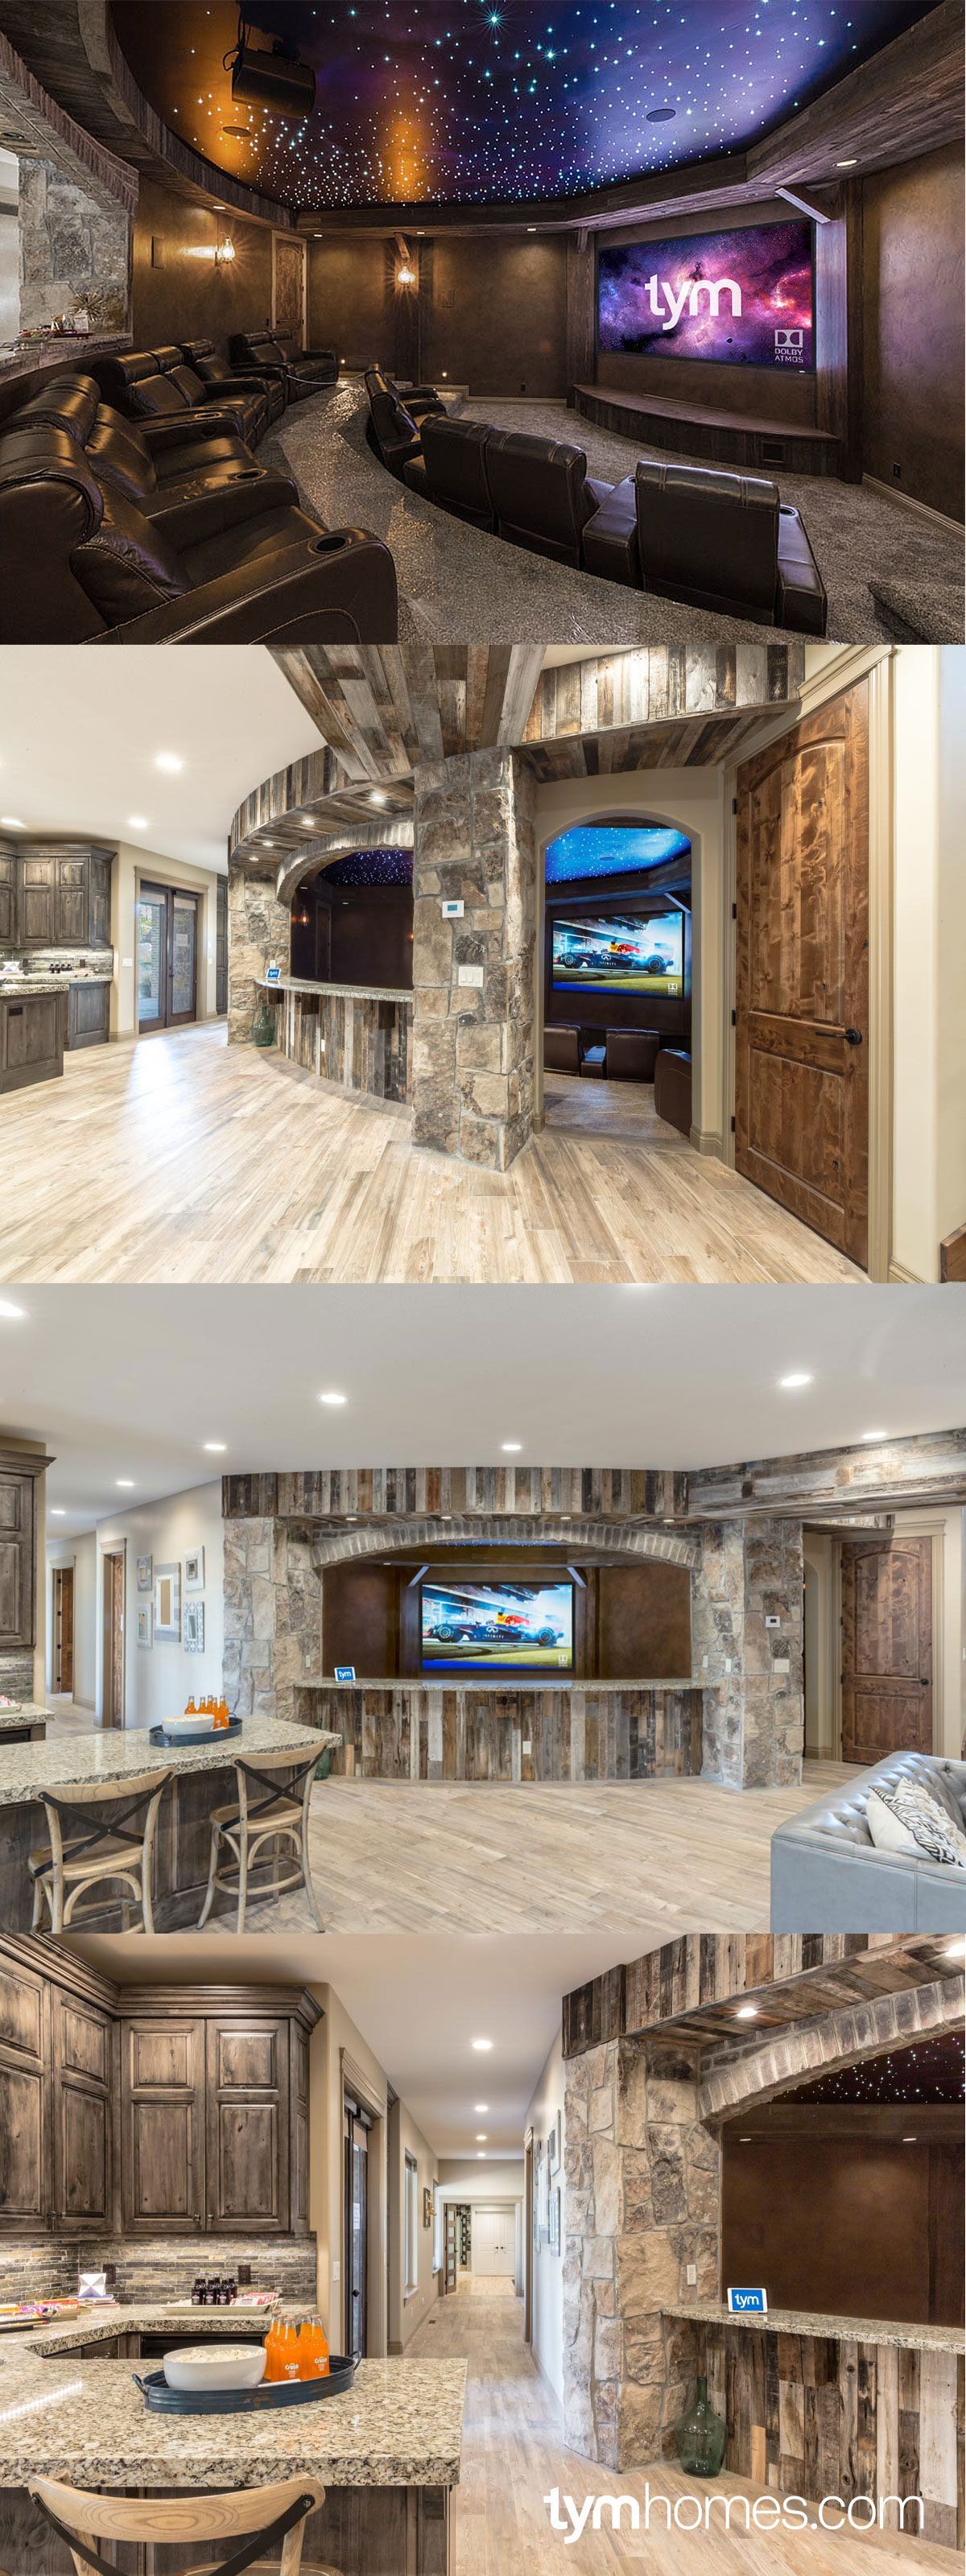 “People’s Choice Award” 2015 Salt Lake Parade of Homes. Home entertainment & automation control by TYM. Featuring #SavantSystems